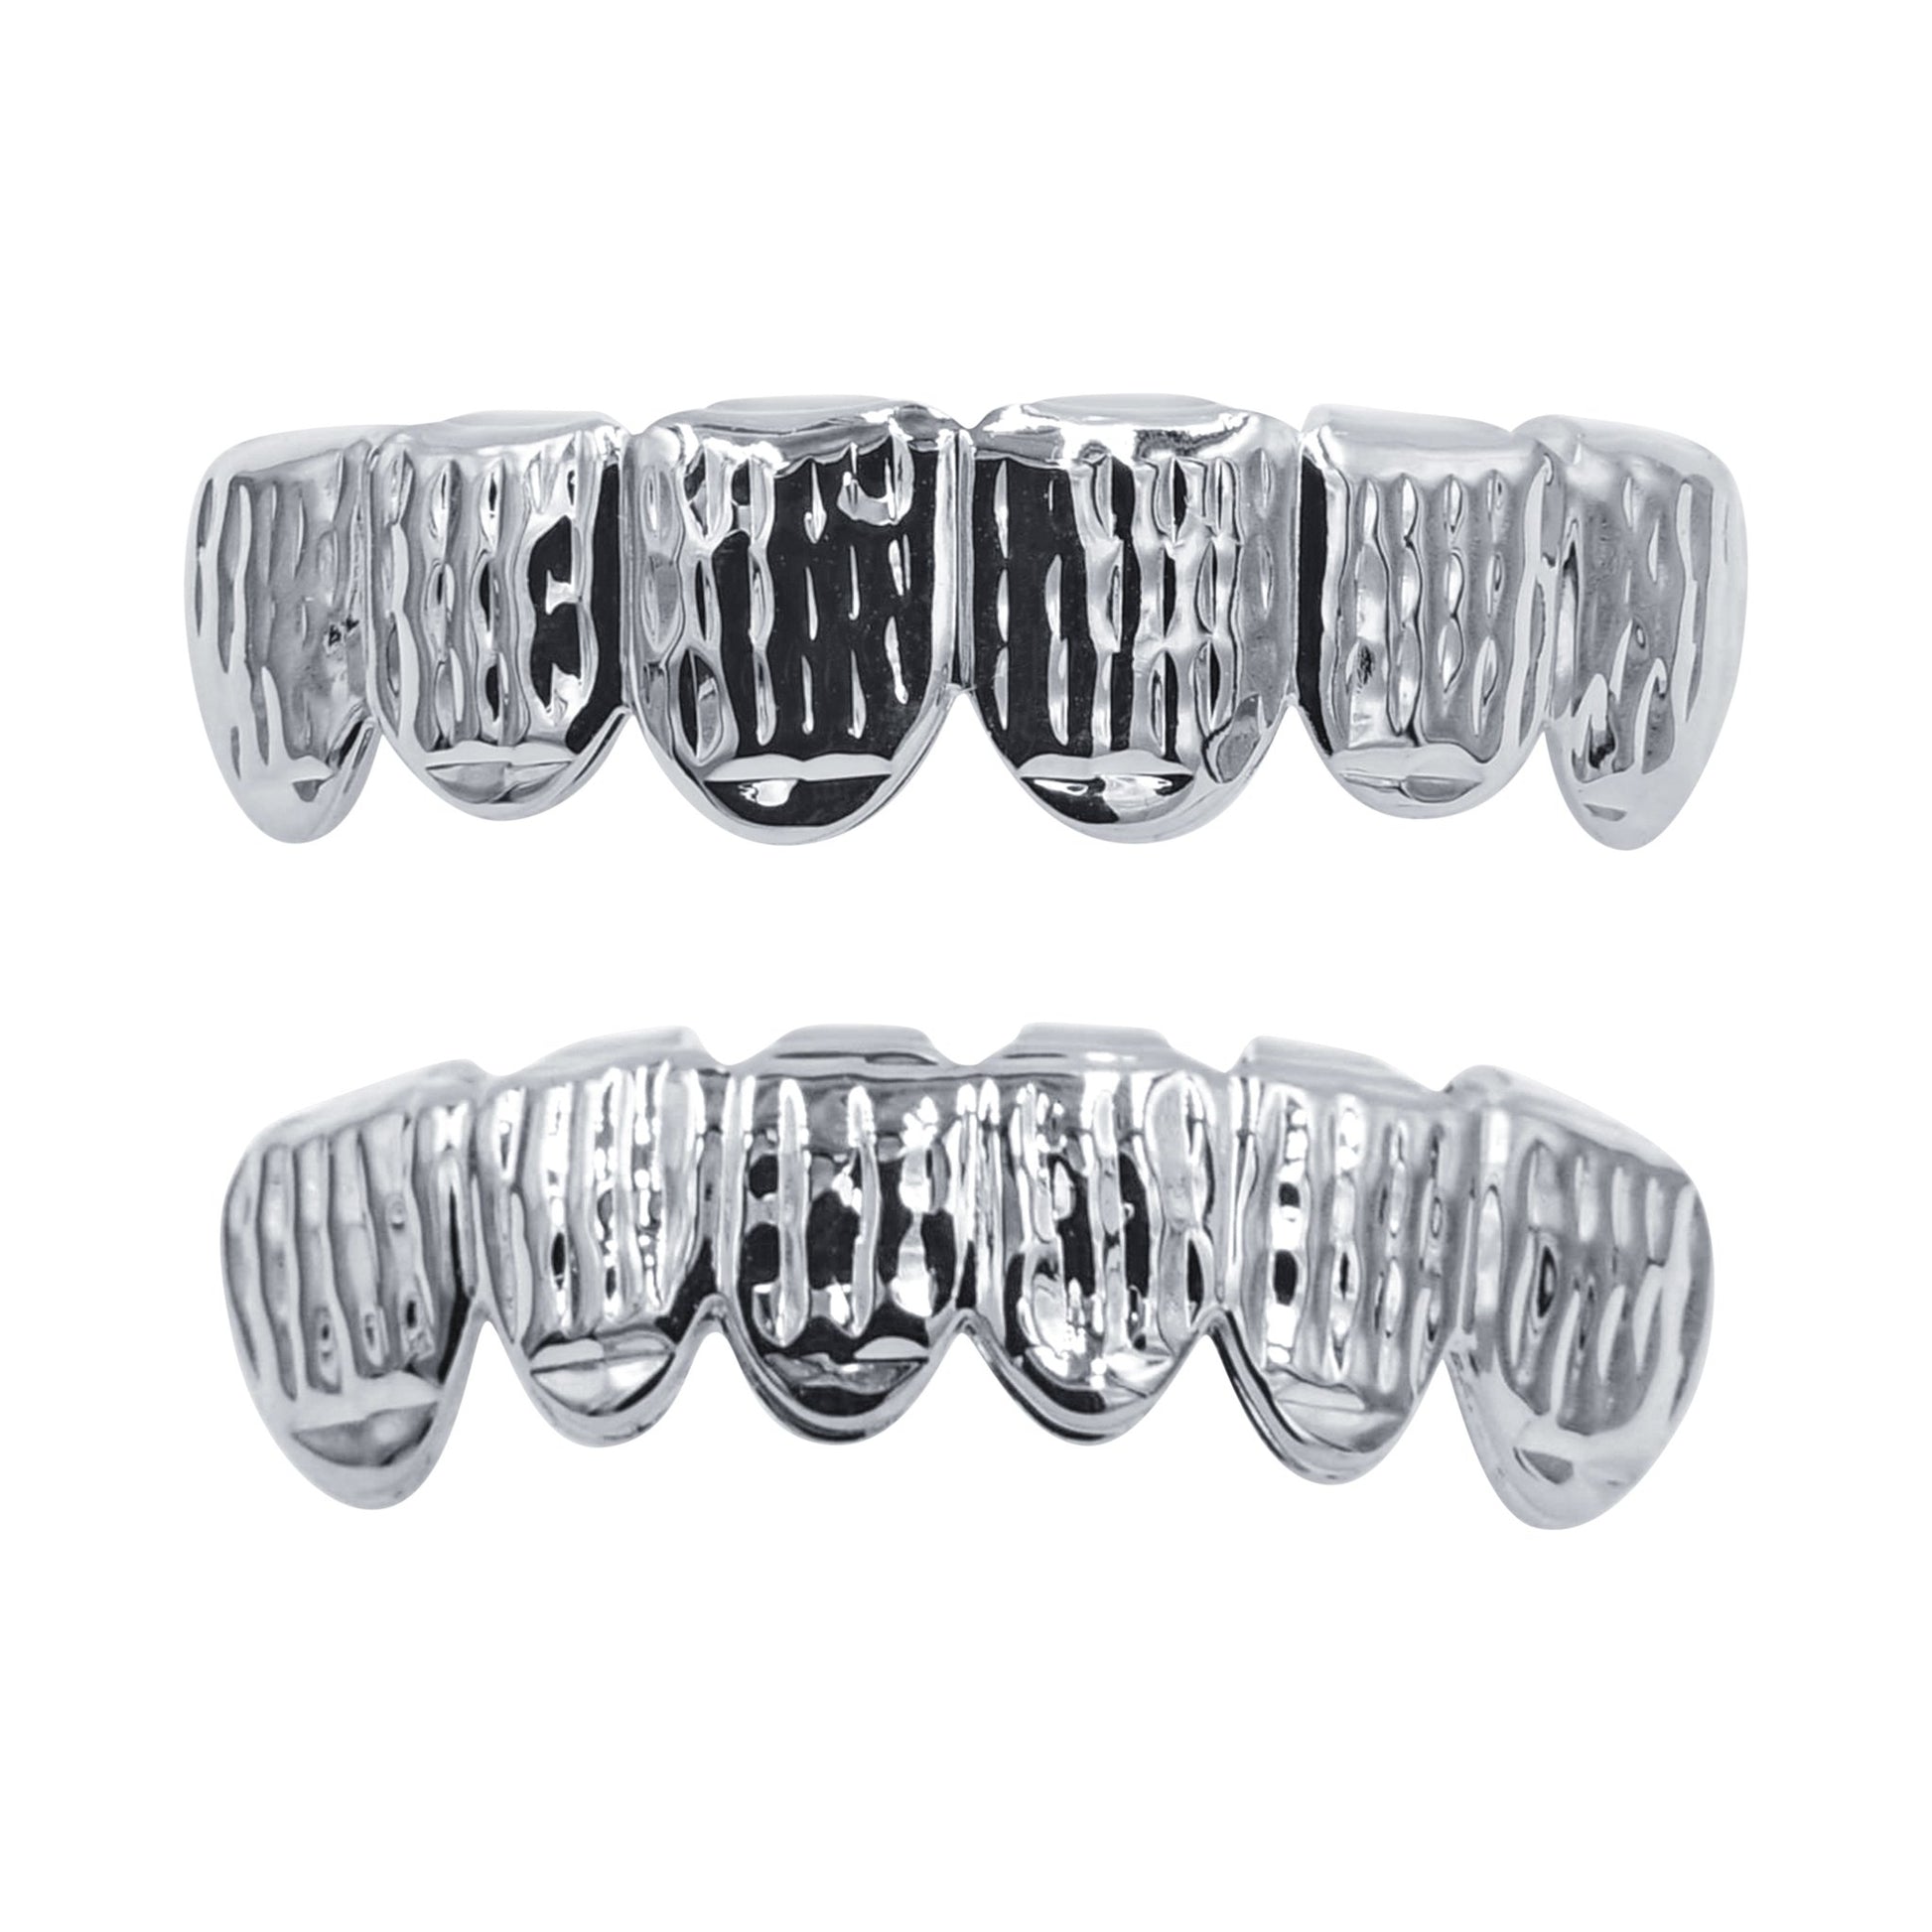 Solid Lustrous Grillz- HIP HOP GRILLZ IN SILVER COLOR I 913281 - ONEZINOTTA , jewelery that shines like gold...